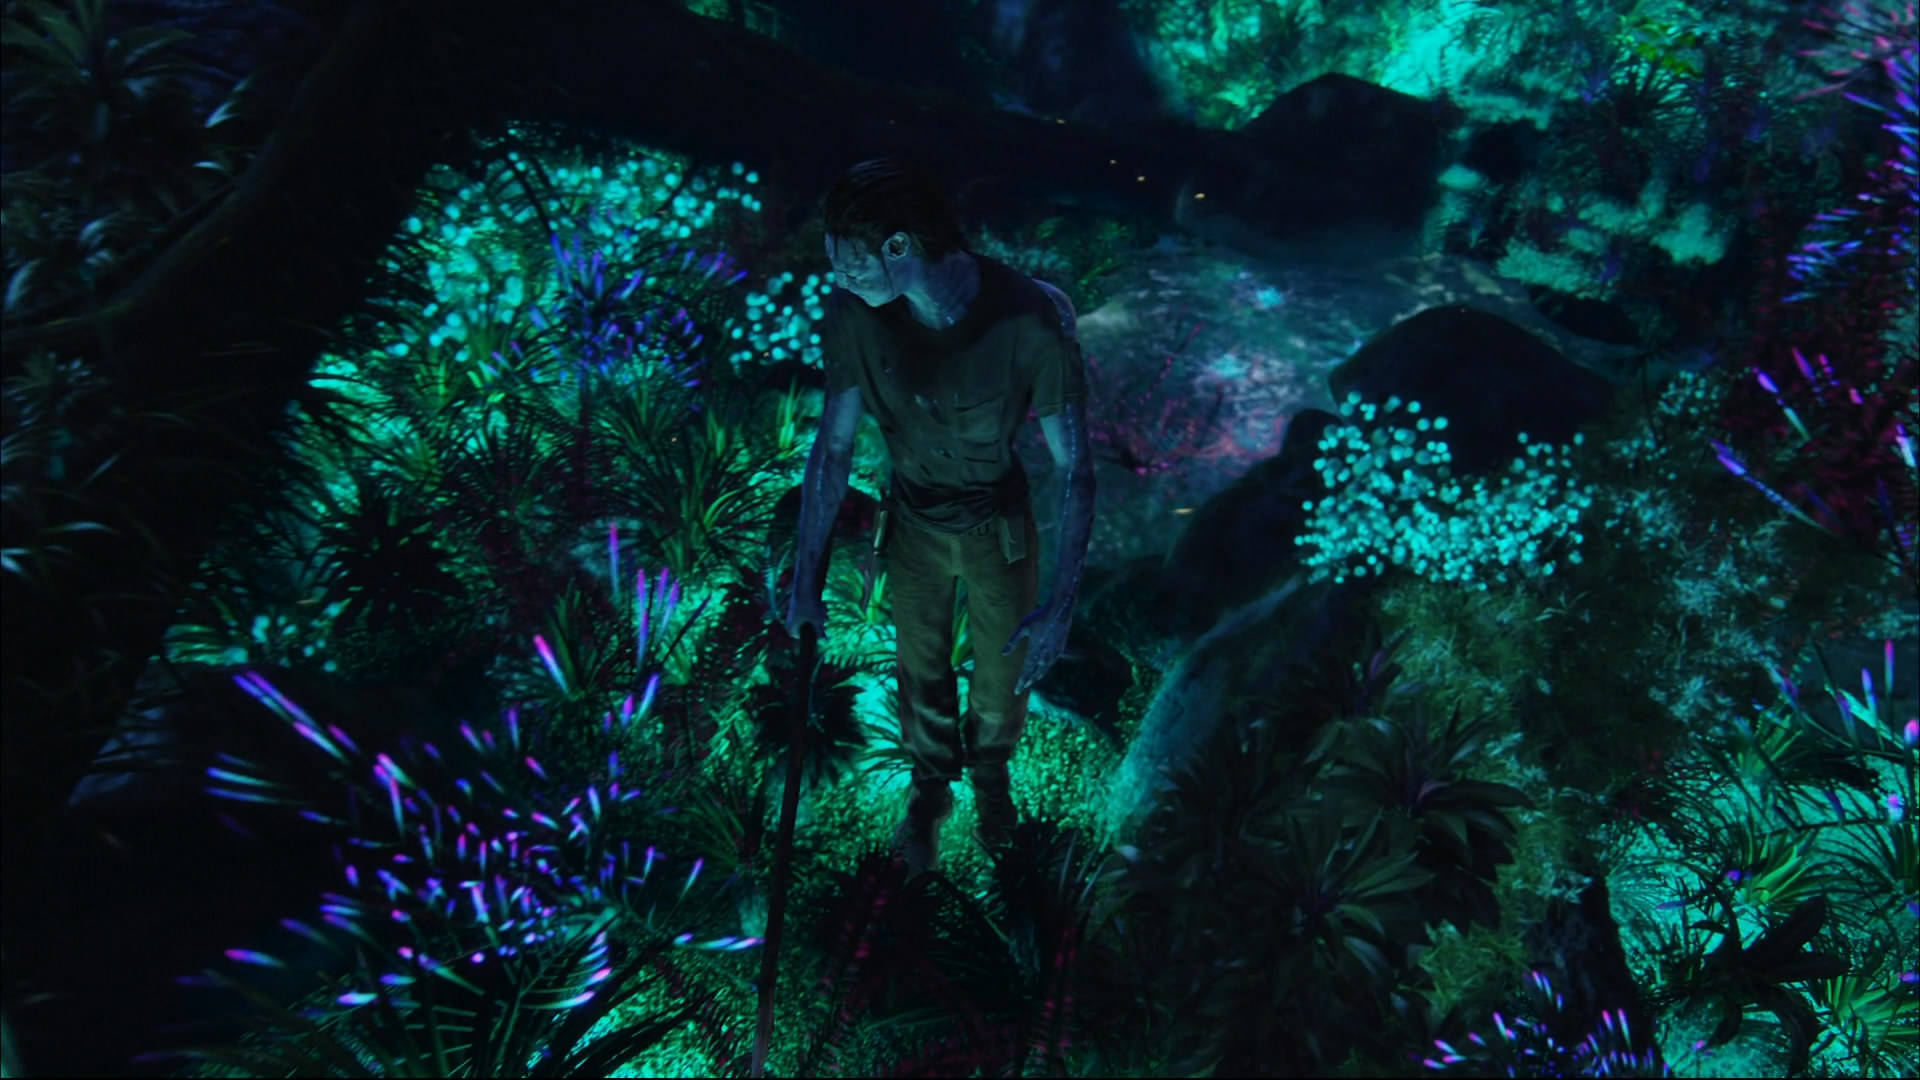 Travel to the magical world of Pandora with Avatar. Wallpaper